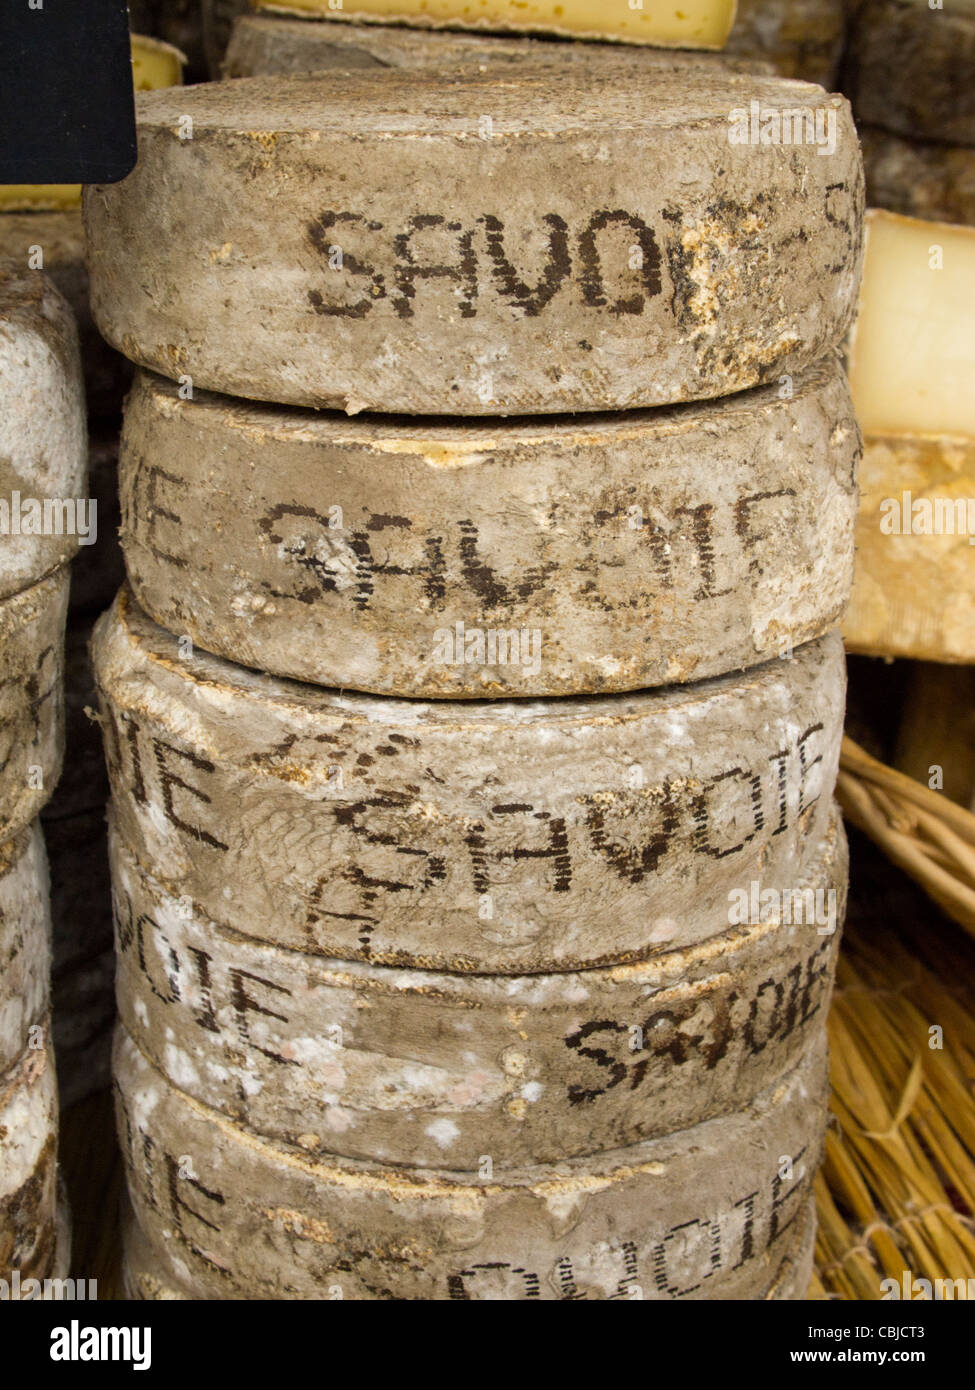 Cheeses in the market, Chamonix, France Stock Photo